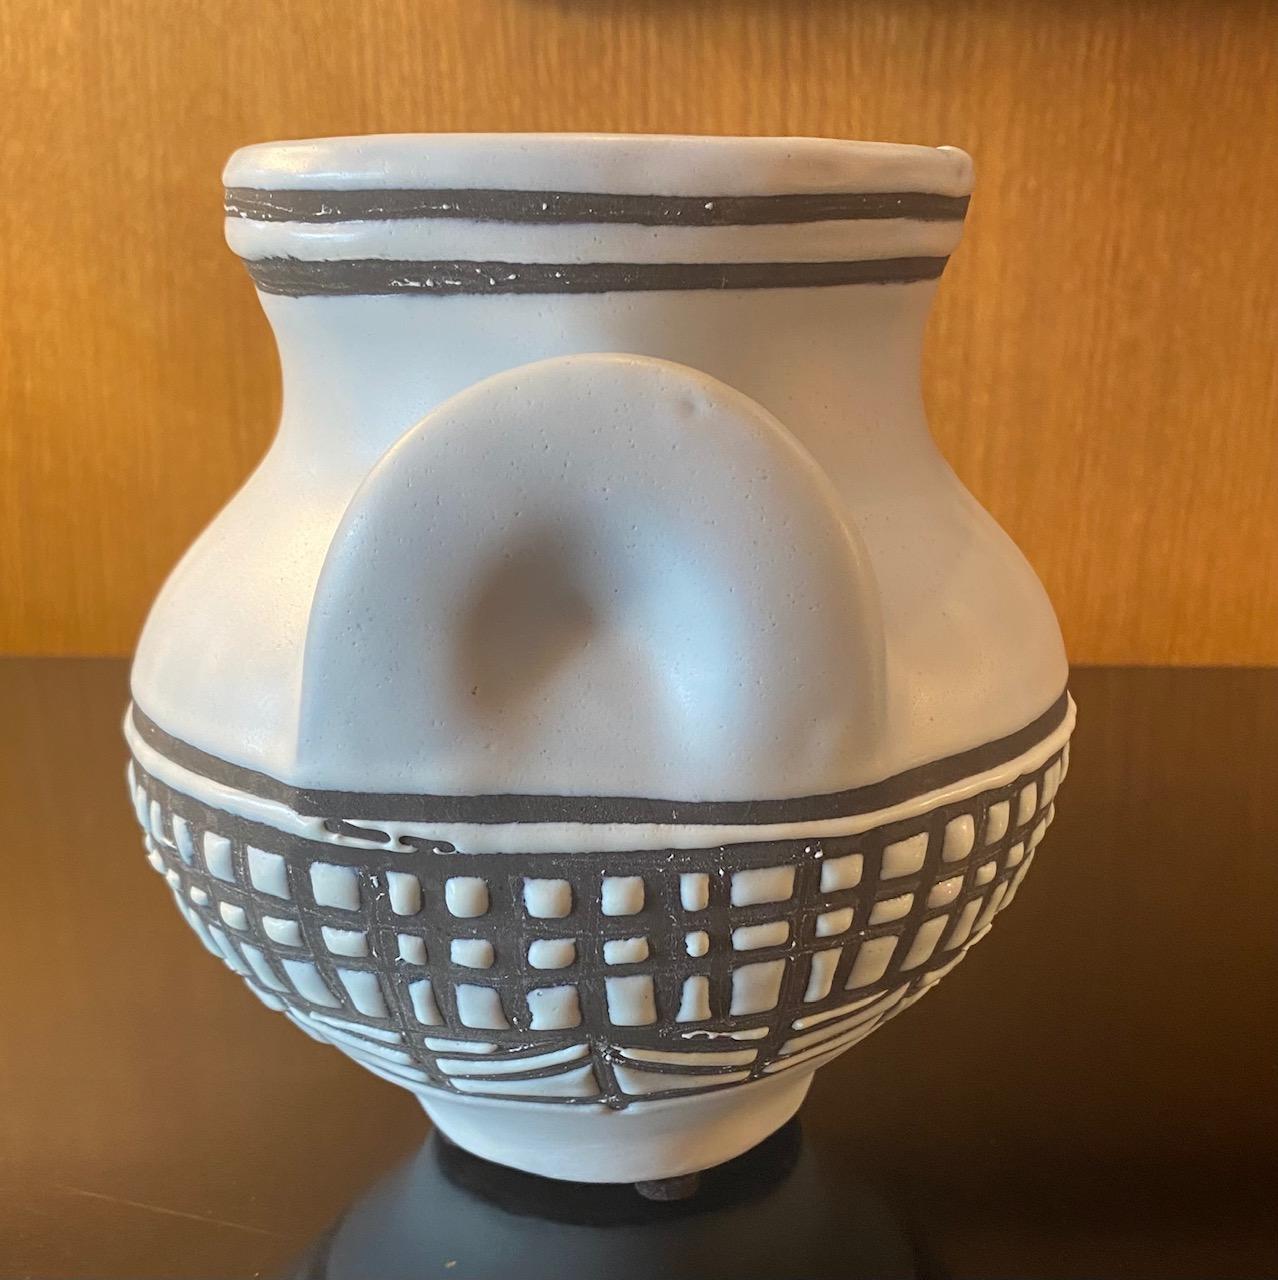 Ceramic vase by Roger Capron, Vallauris, France, 1950s
Signed Capron Vallauris.